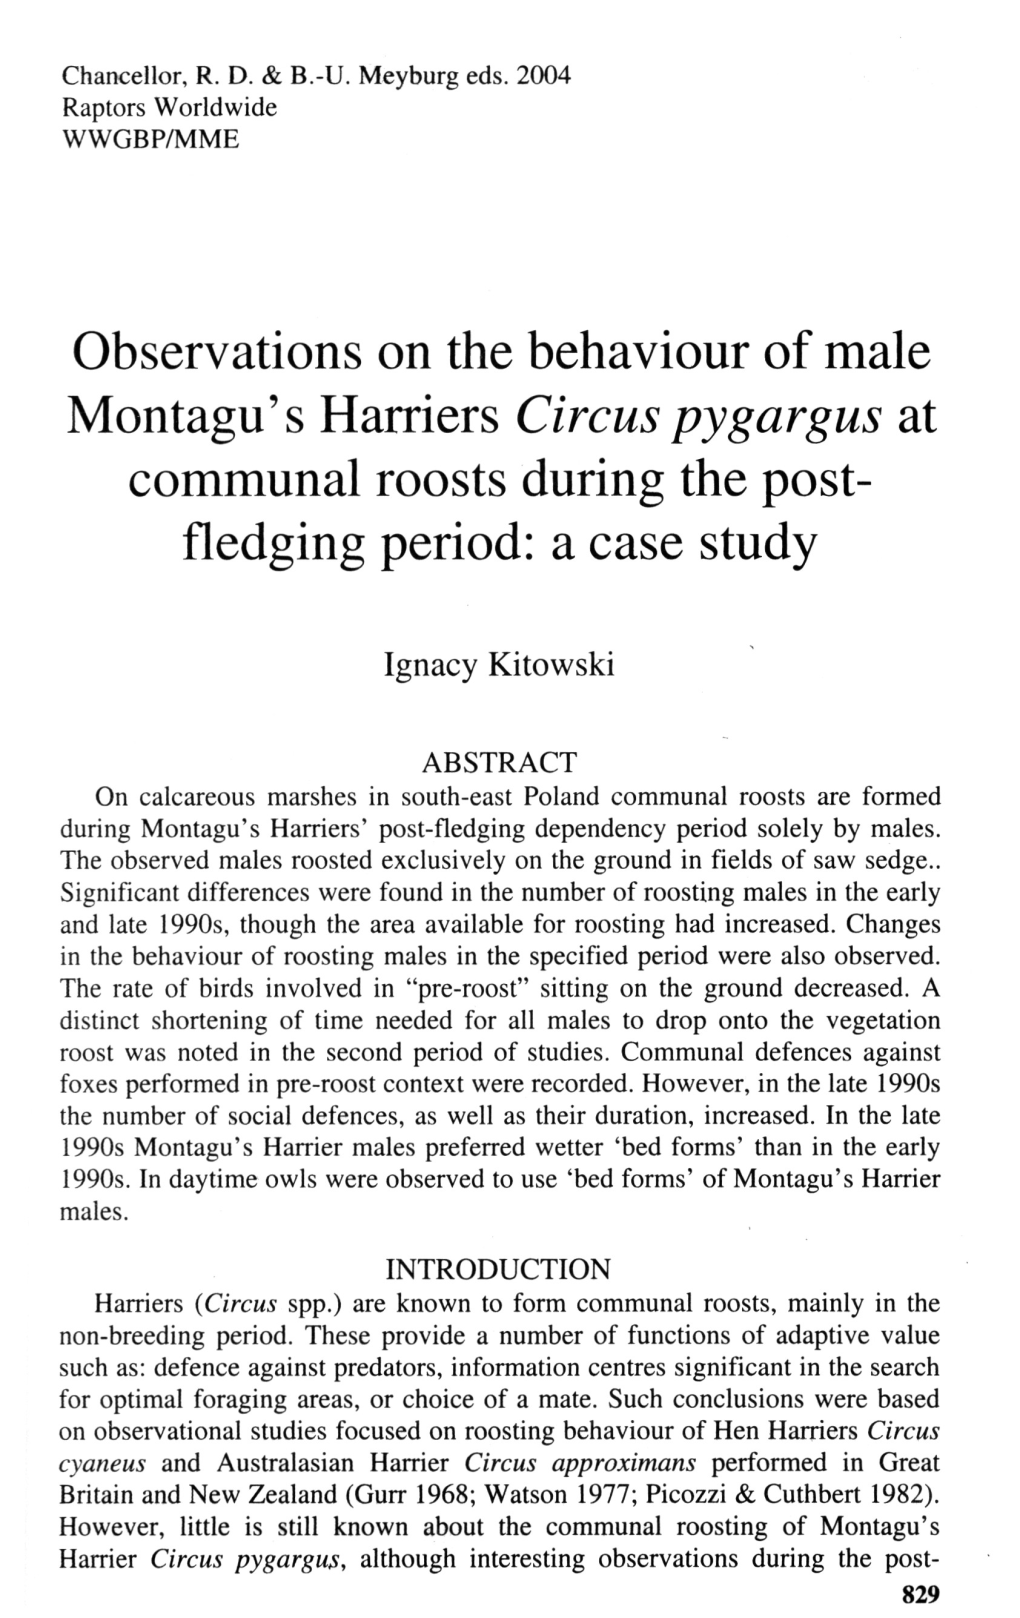 Observations on the Behaviour of Male Montagu's Harriers Circuspygargus at Communal Roosts During the Post- Fledging Period: a Case Study